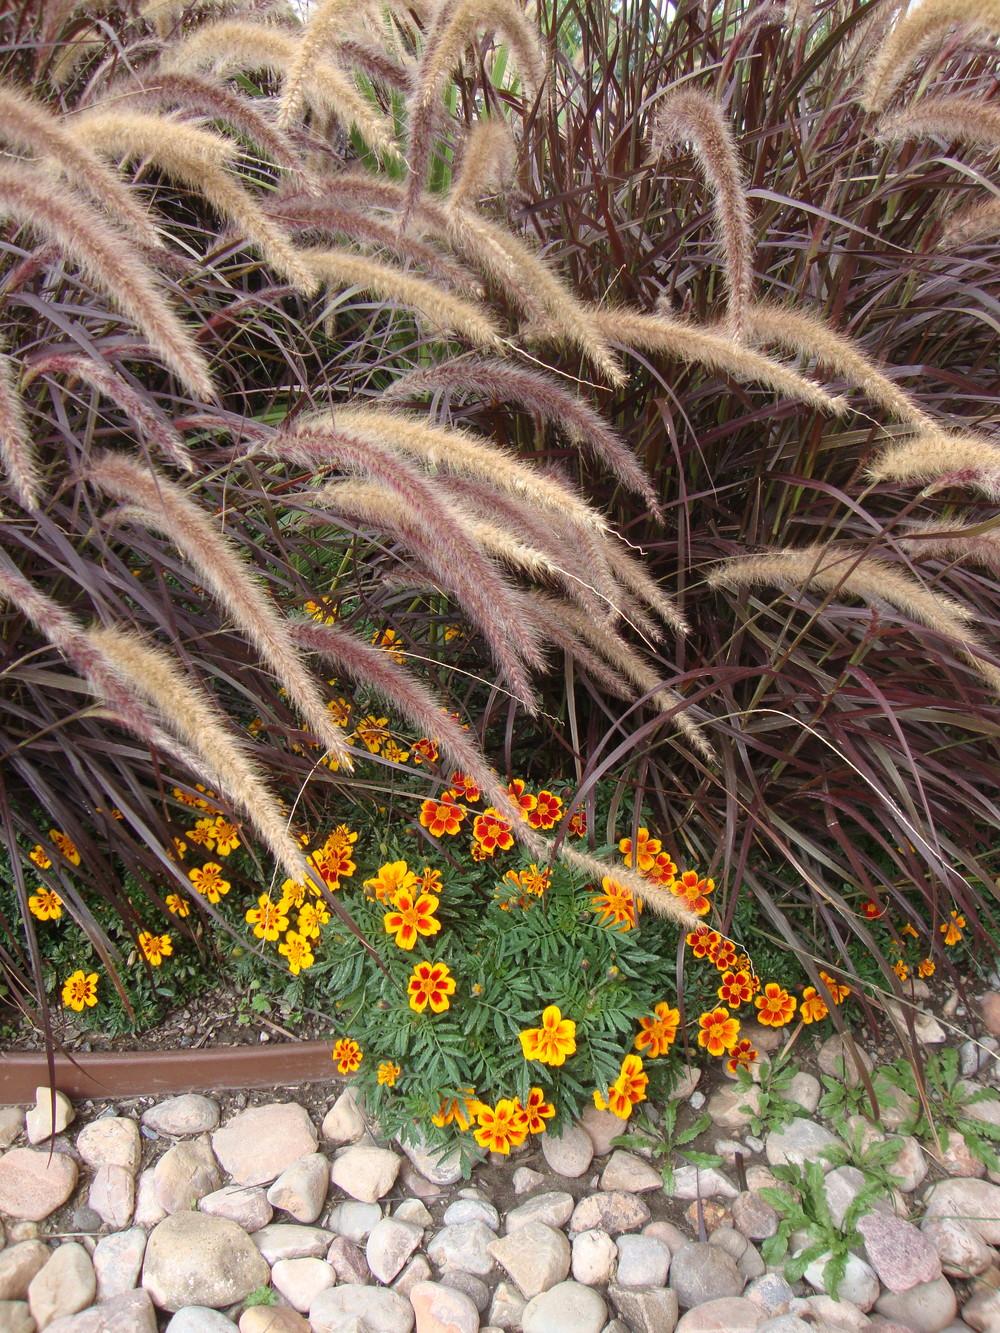 Photo of Purple Fountain Grass (Cenchrus setaceus 'Rubrum') uploaded by Paul2032